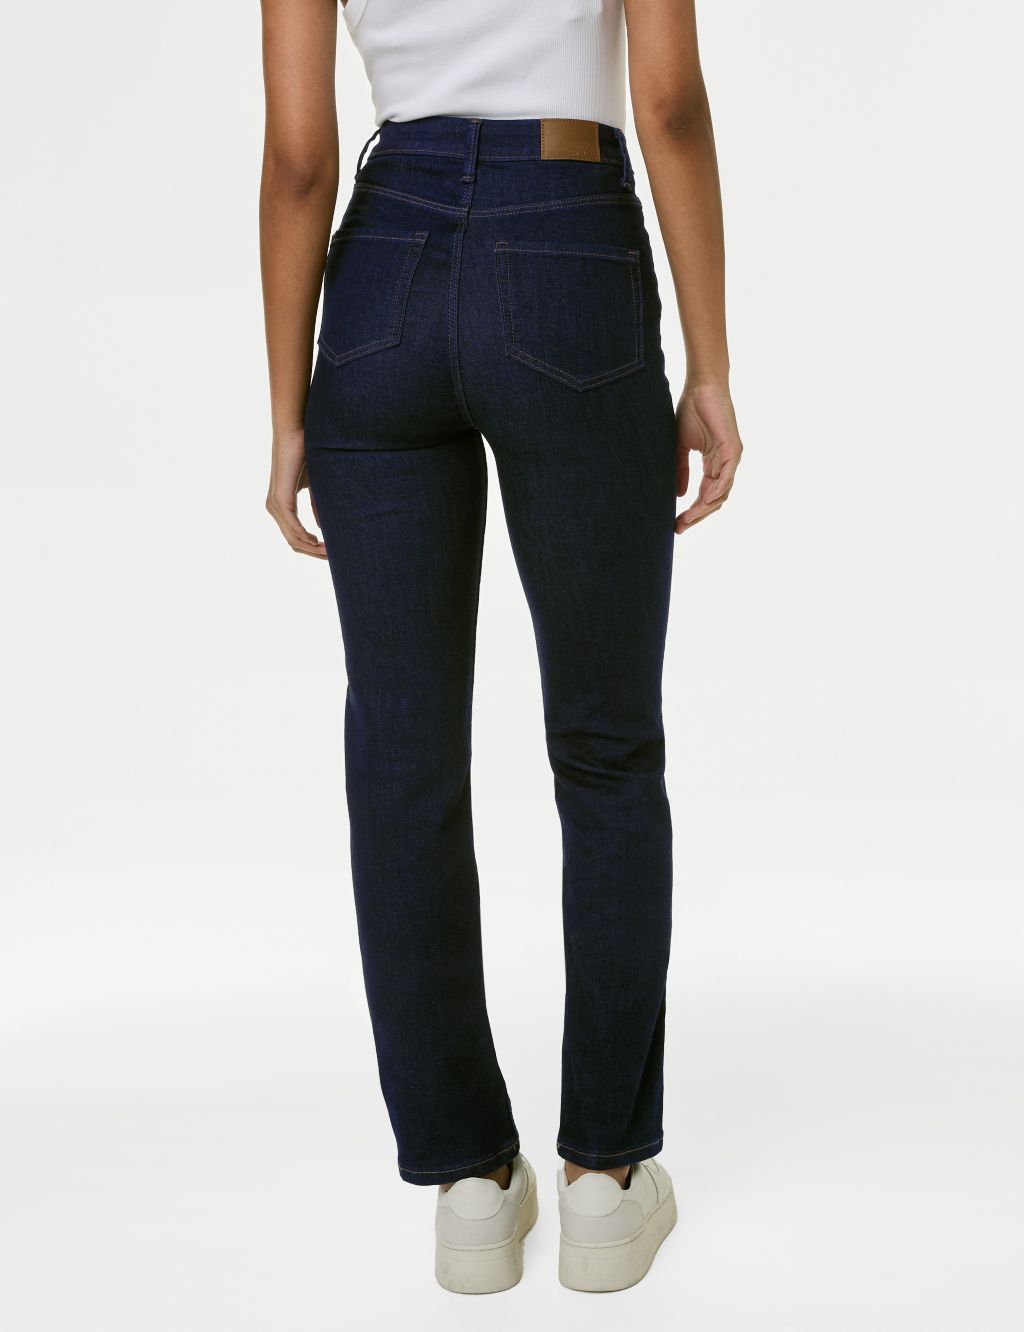 Sienna Supersoft Straight Leg Jeans image 5